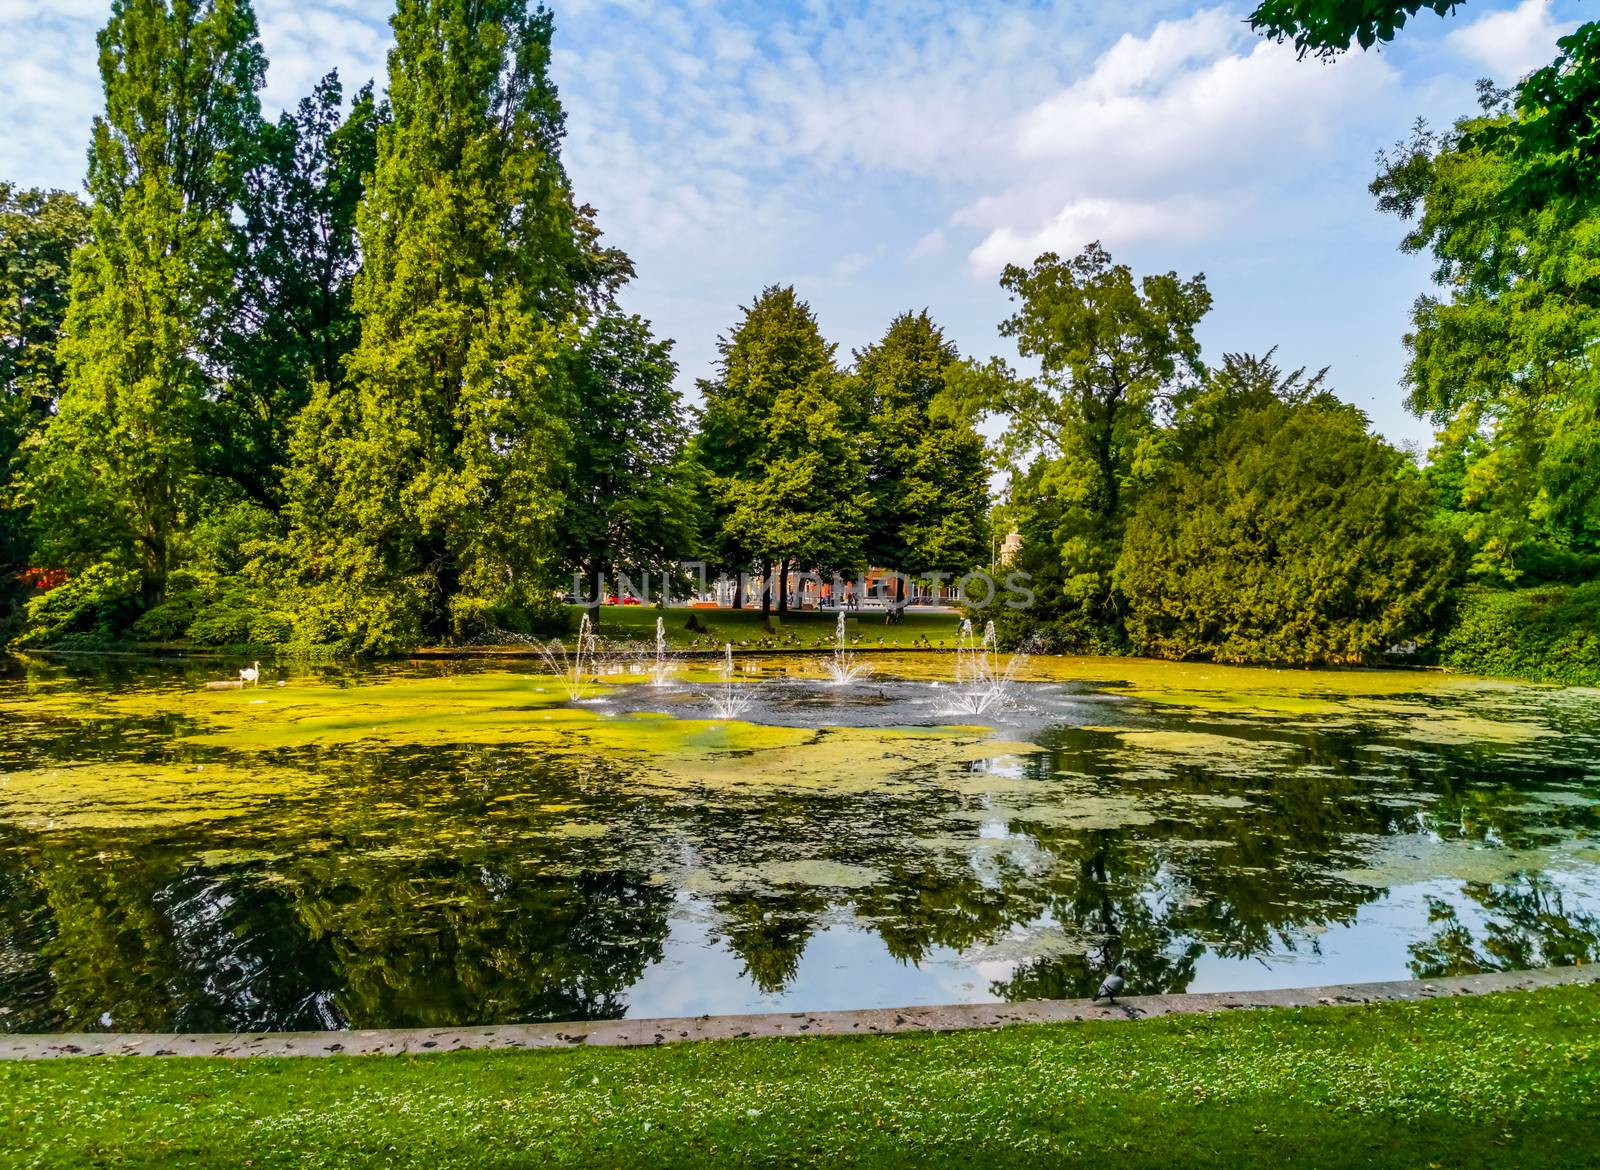 city park Valkenberg of breda with the pond and water fountains, Nature scenery of the Netherlands